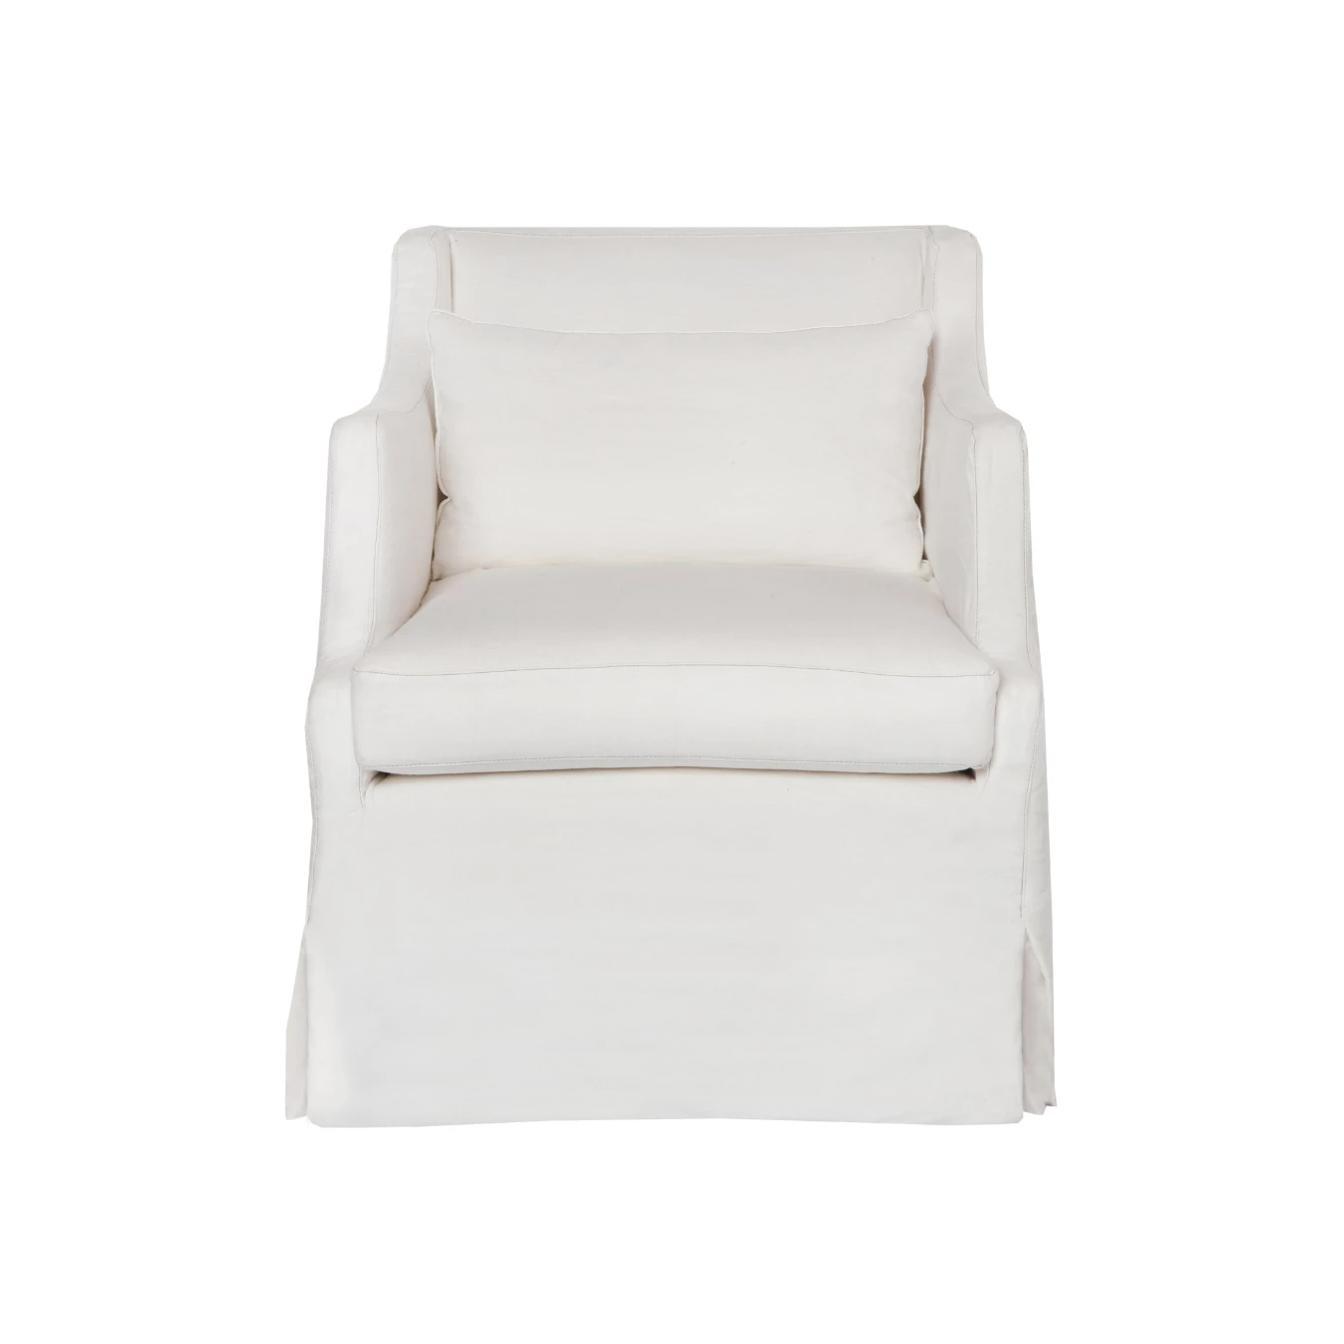 The slipcovered Amalia Chair from Cisco Brothers is one of our dreamiest seats!  Beautifully made in white 100% linen, this chair is equal parts casual and chic.  So comfortable and outside the ordinary -- perfect for traditional & coastal styles! Shown in a Grade J, Brevard Ivory fabric.